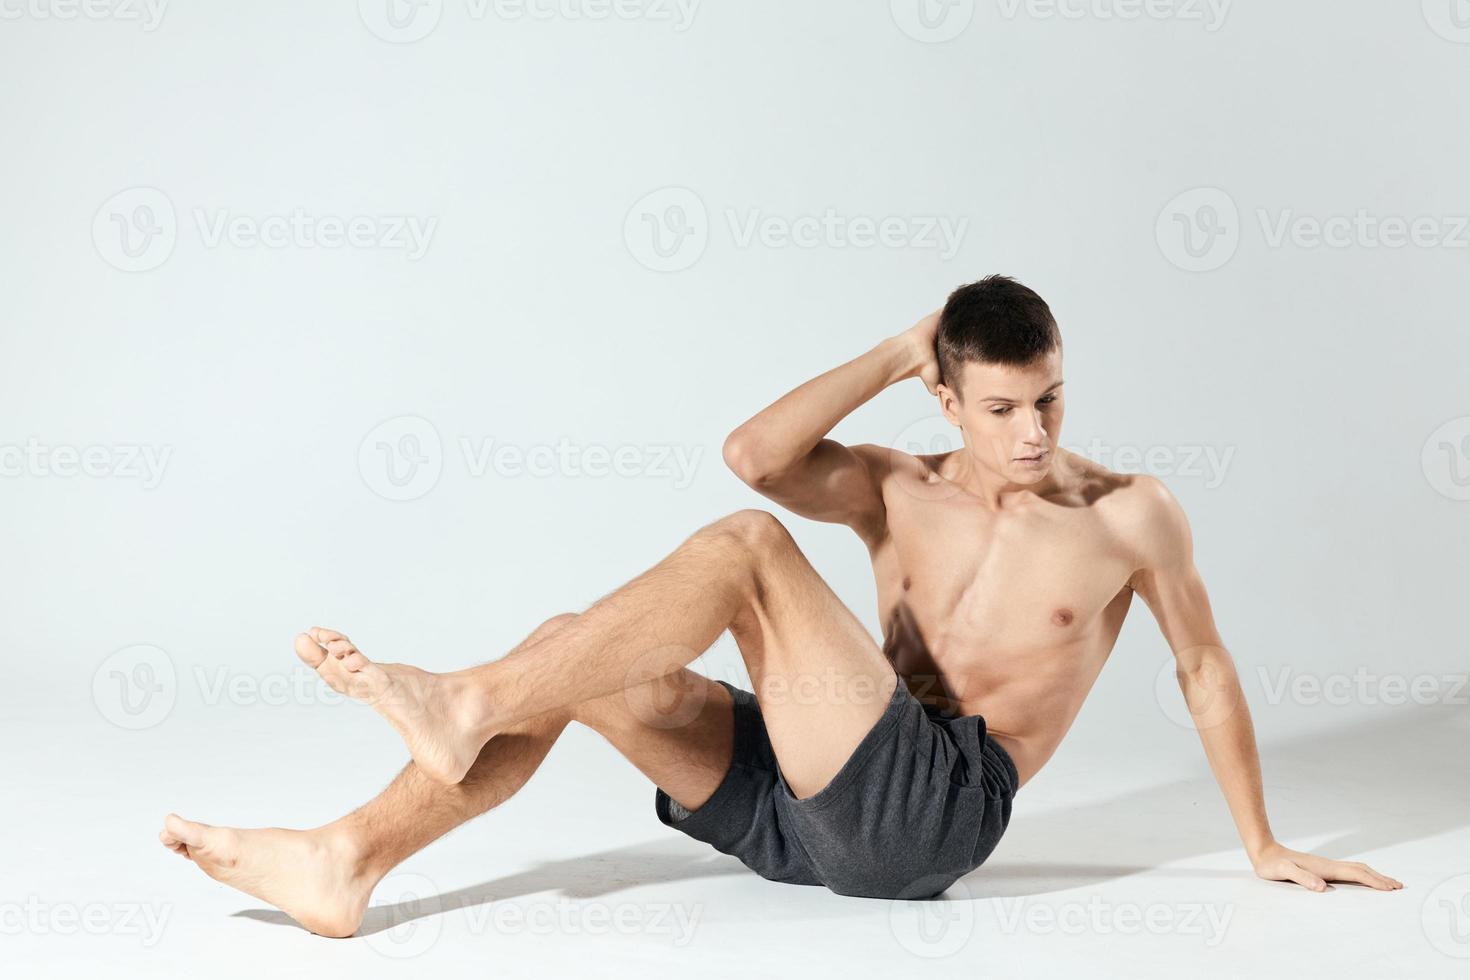 morning exercises young athlete in gray shorts and an inflated torso fitness workout photo